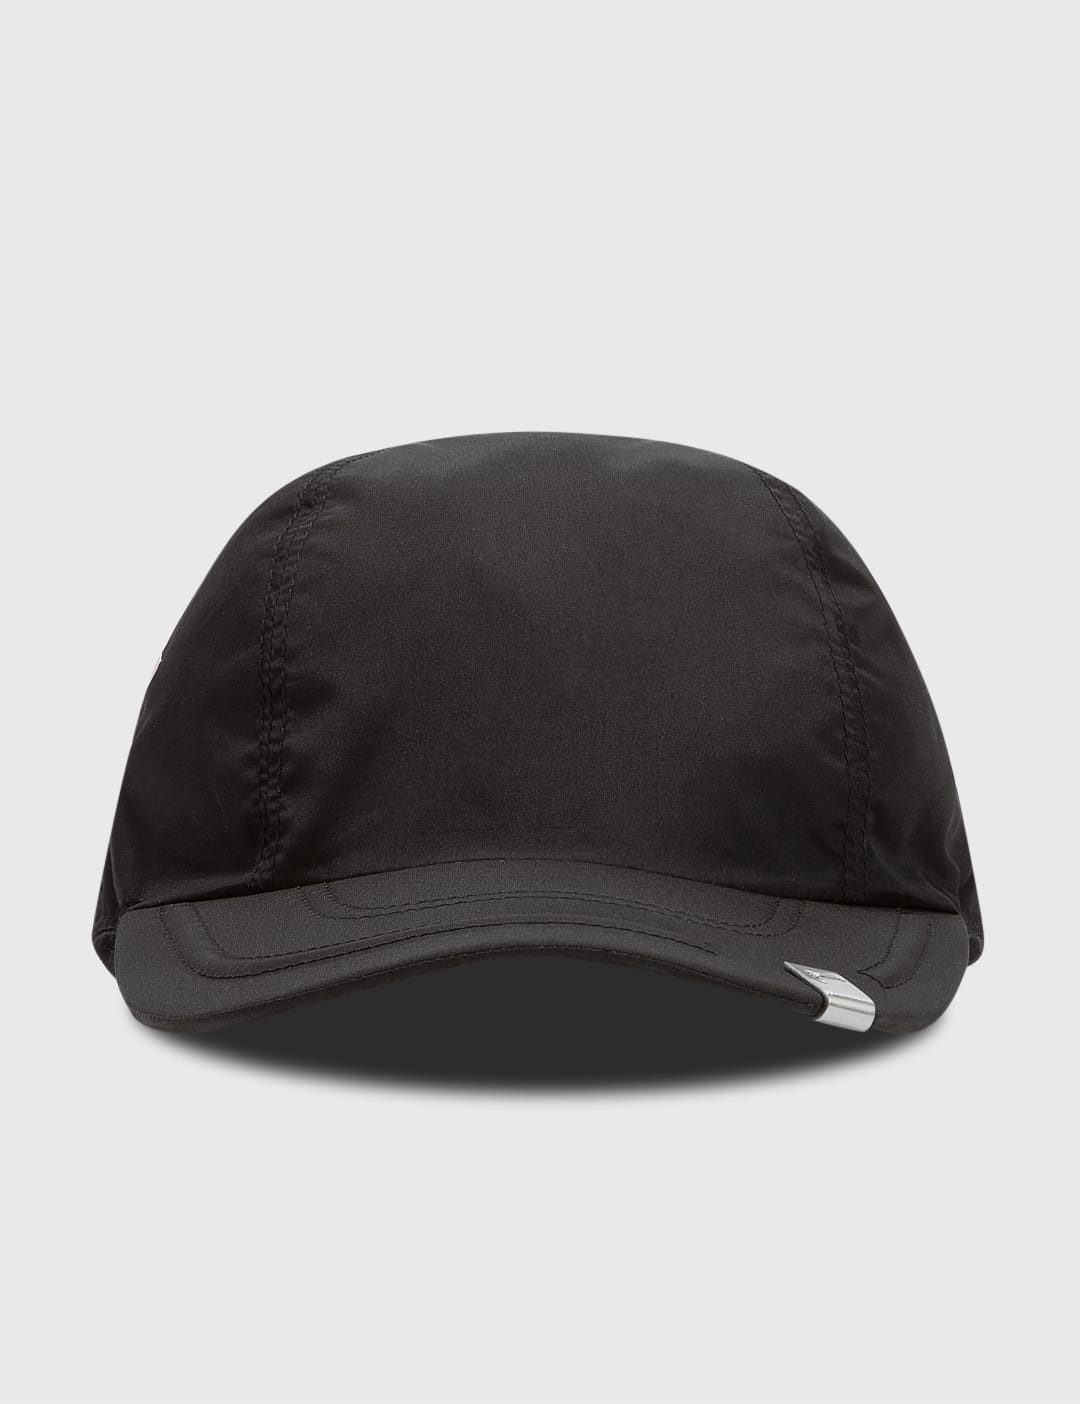 Sporty & Rich - Old English “S” Cap | HBX - Globally Curated 